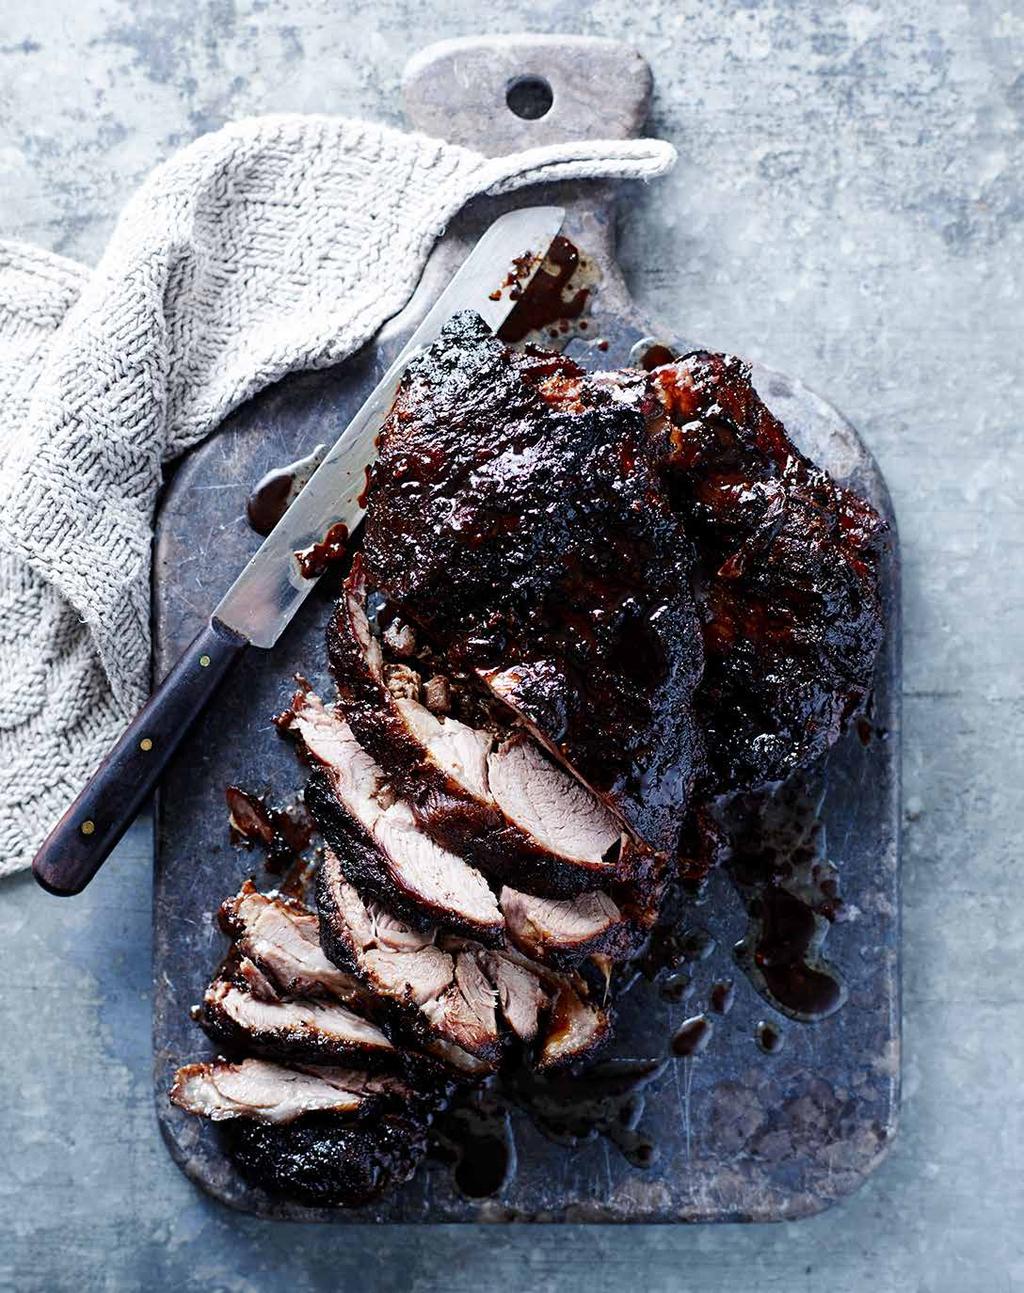 Roasted Lamb with Hoisin Sauce Slow-cooking lamb shoulder, basted in sticky hoisin sauce (yes from a jar), for four hours. Spice up for the adults with fresh chilli, peanuts and spring onions.